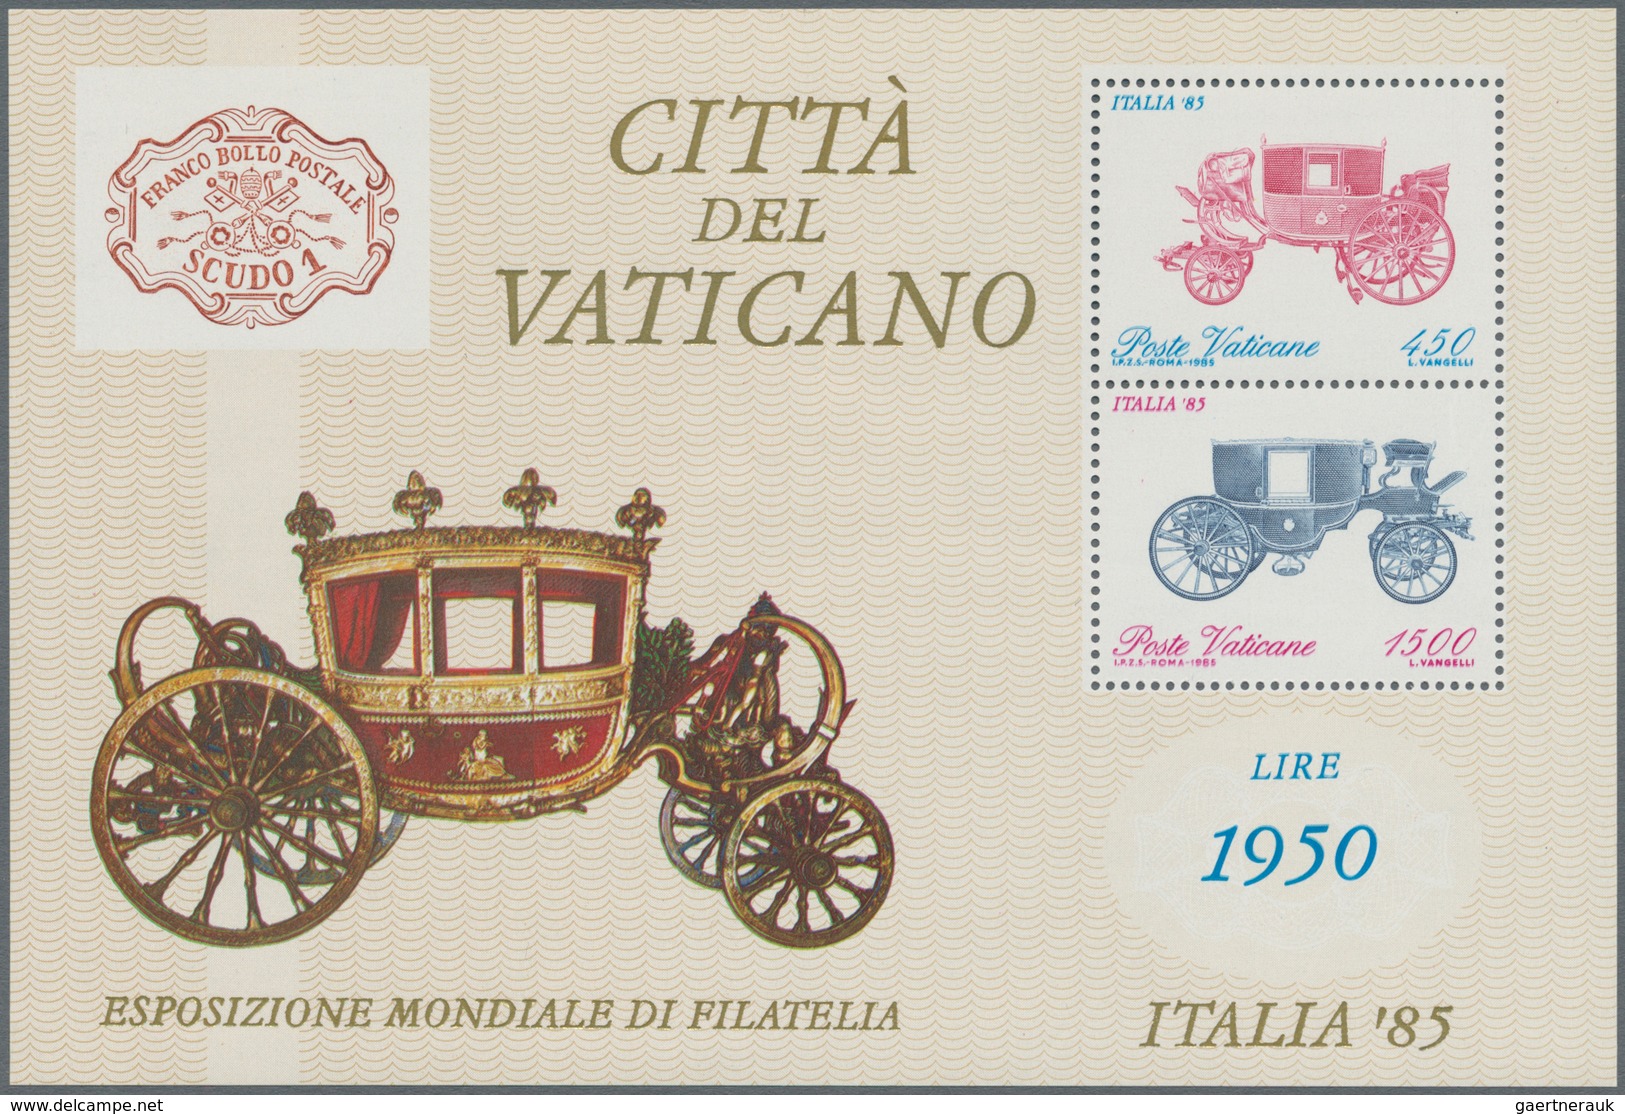 Vatikan: 1985, Stamp Exhibition ITALIA '85, Souvenir Sheet With DOUBLE PRINT Of The Blue Color. VF M - Unused Stamps